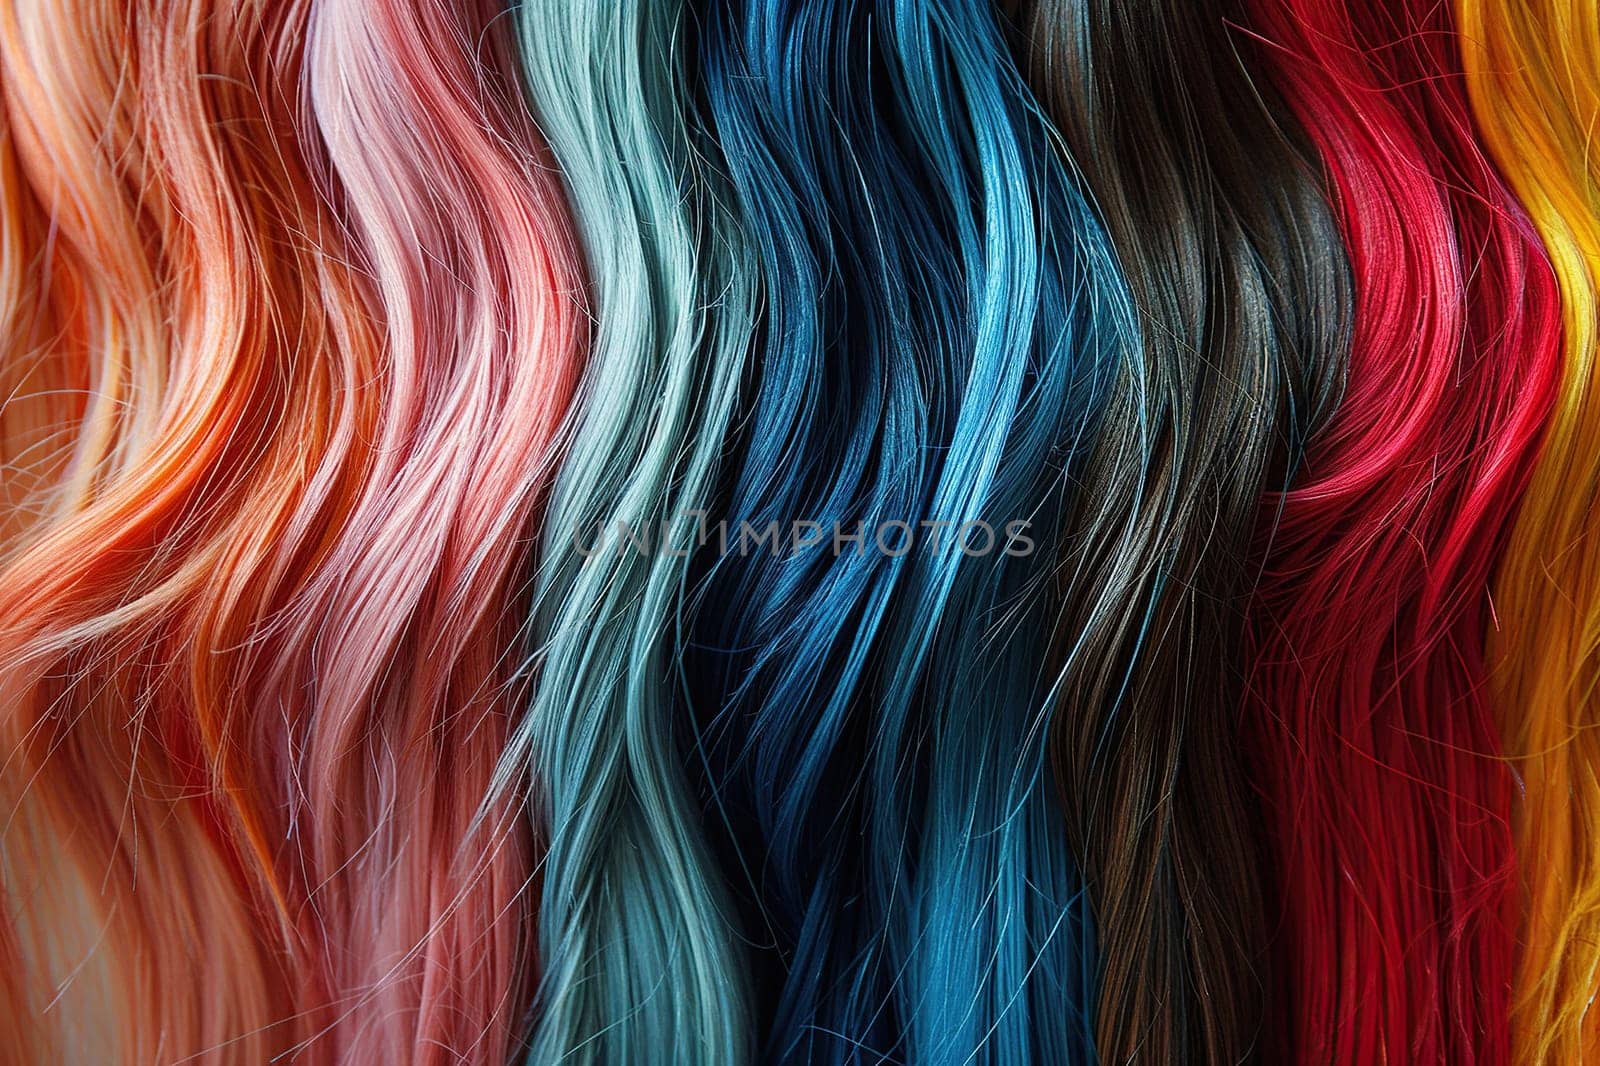 Straight strands of hair in bright colors. A palette with an example of hair dye.